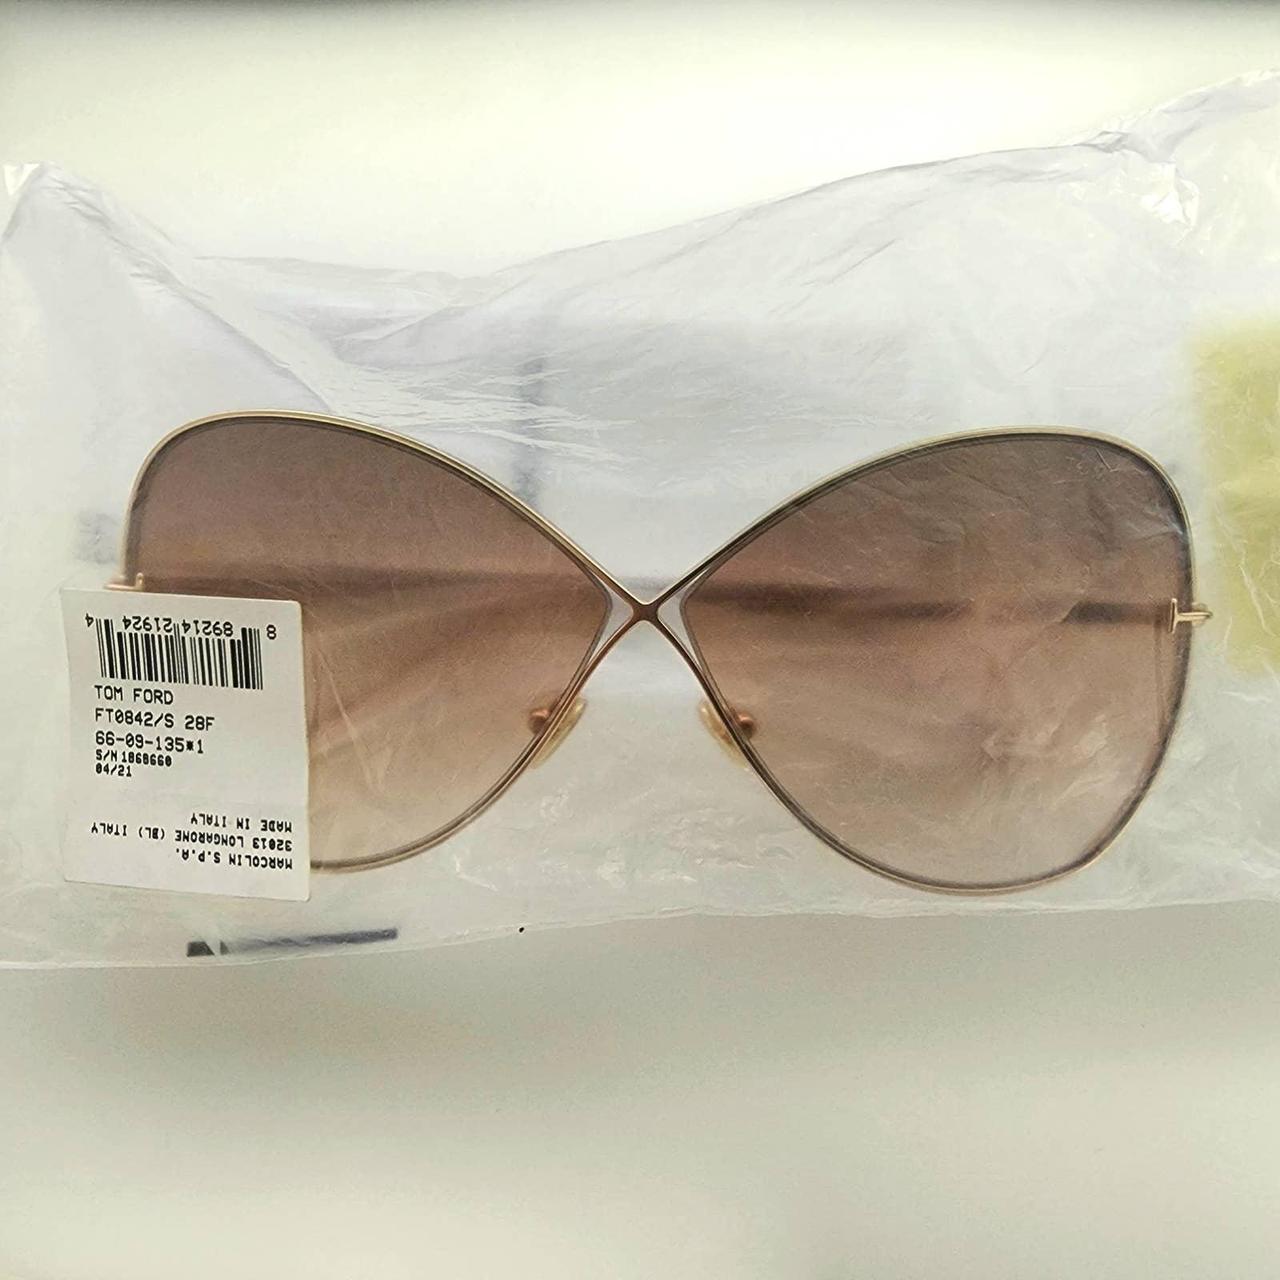 TOM FORD Women's Gold and Brown Sunglasses | Depop